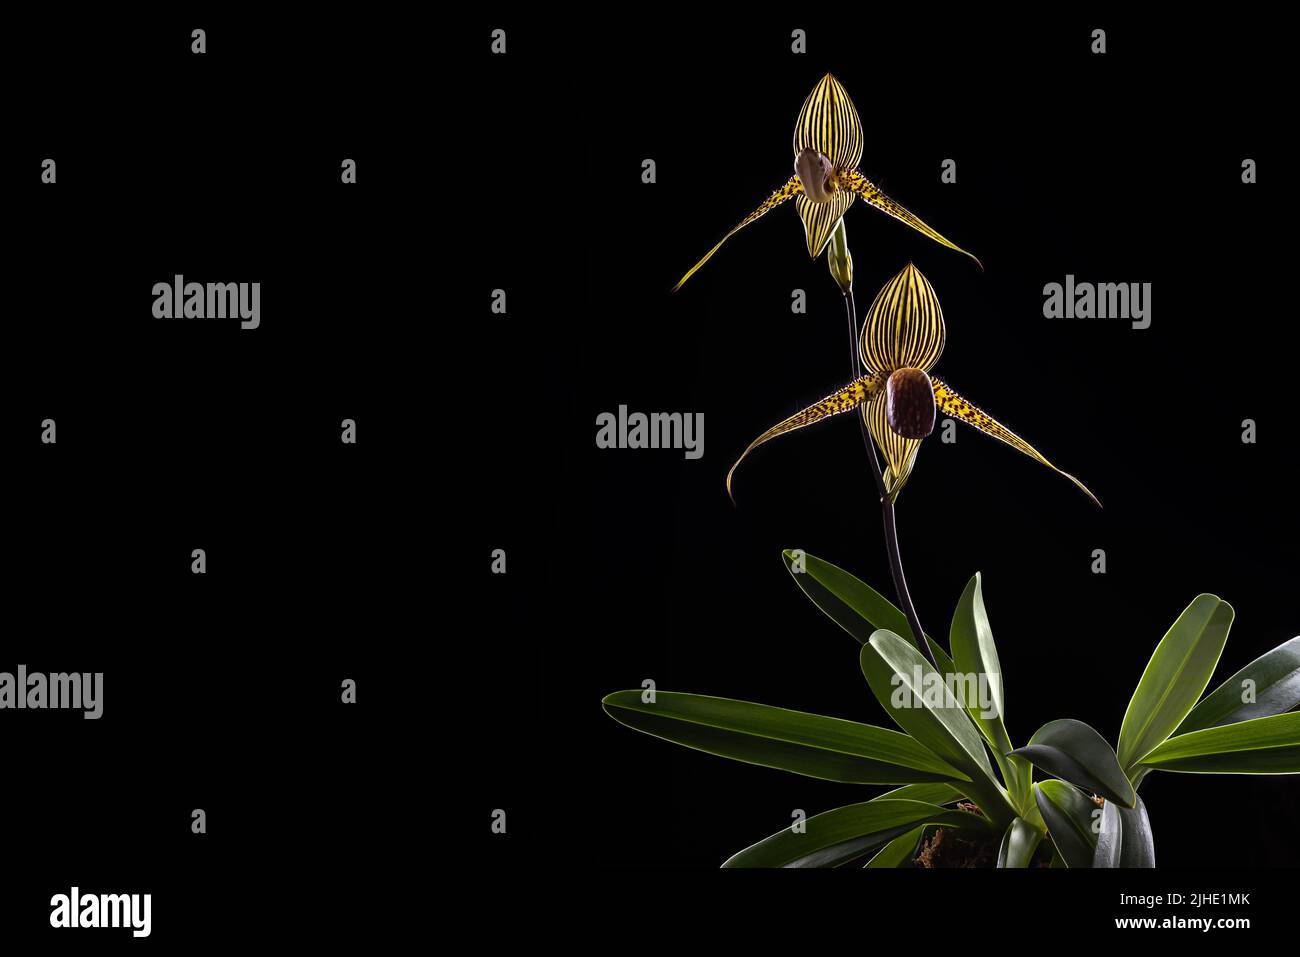 Blooming Paphiopedilum rothschildianum orchid specie on black background. Endangered terrestial and lithophyte orchid that is endemic to Kinabalu moun Stock Photo